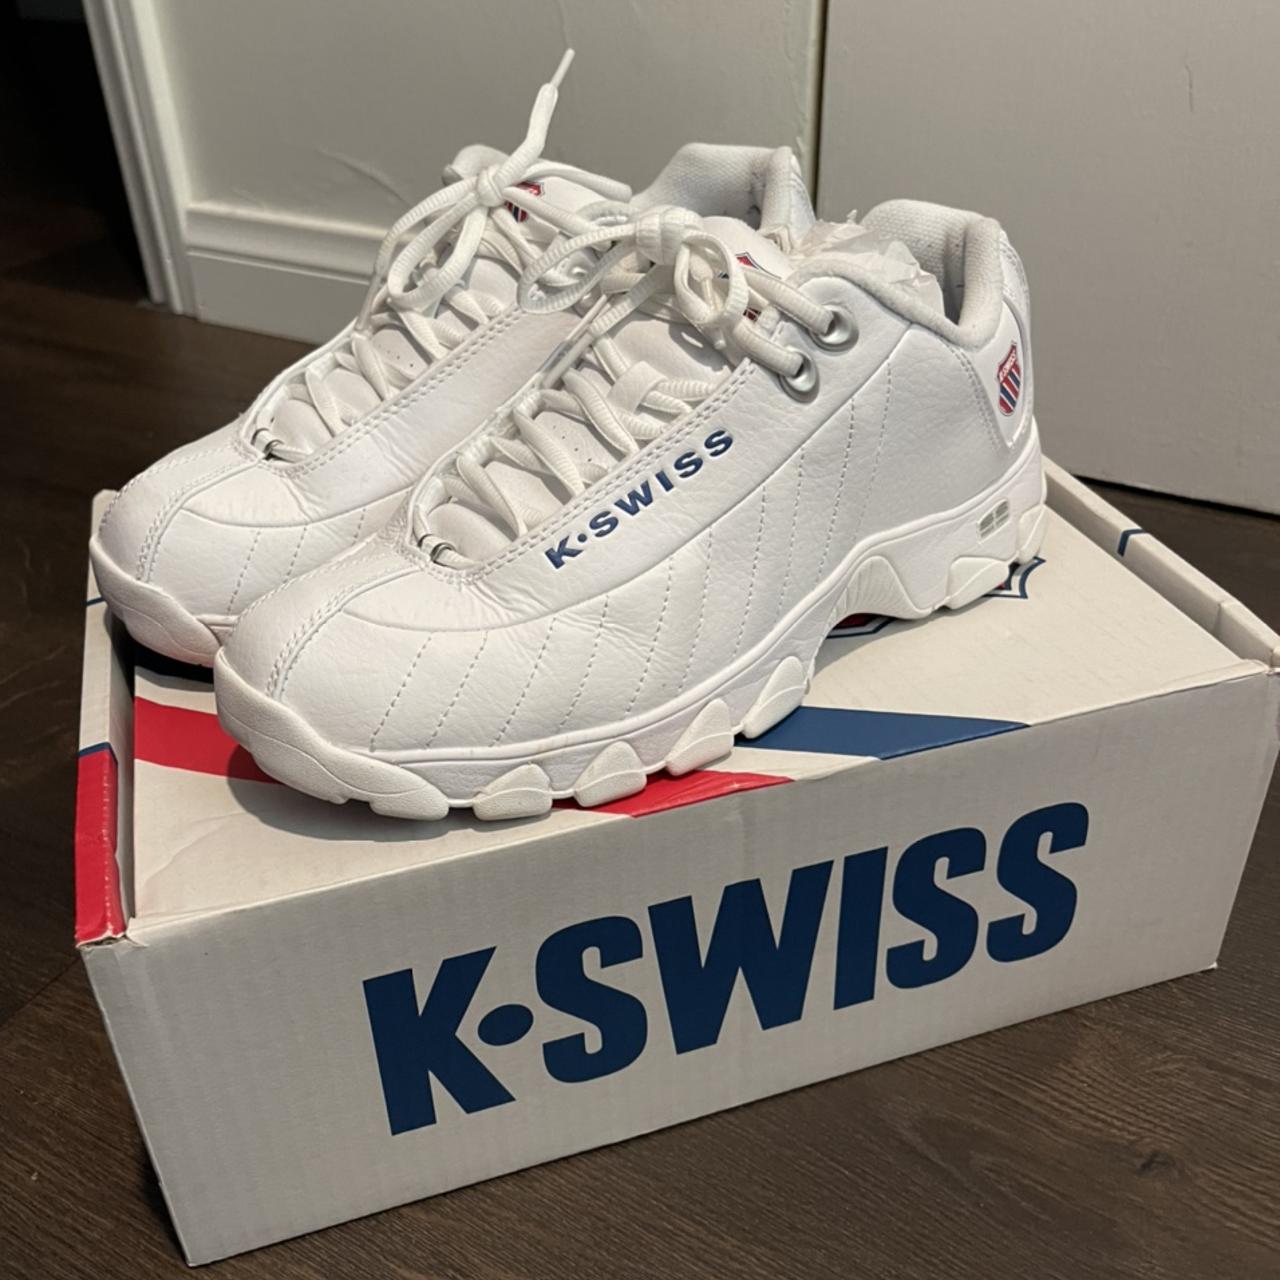 K-Swiss Men's White and Blue Trainers